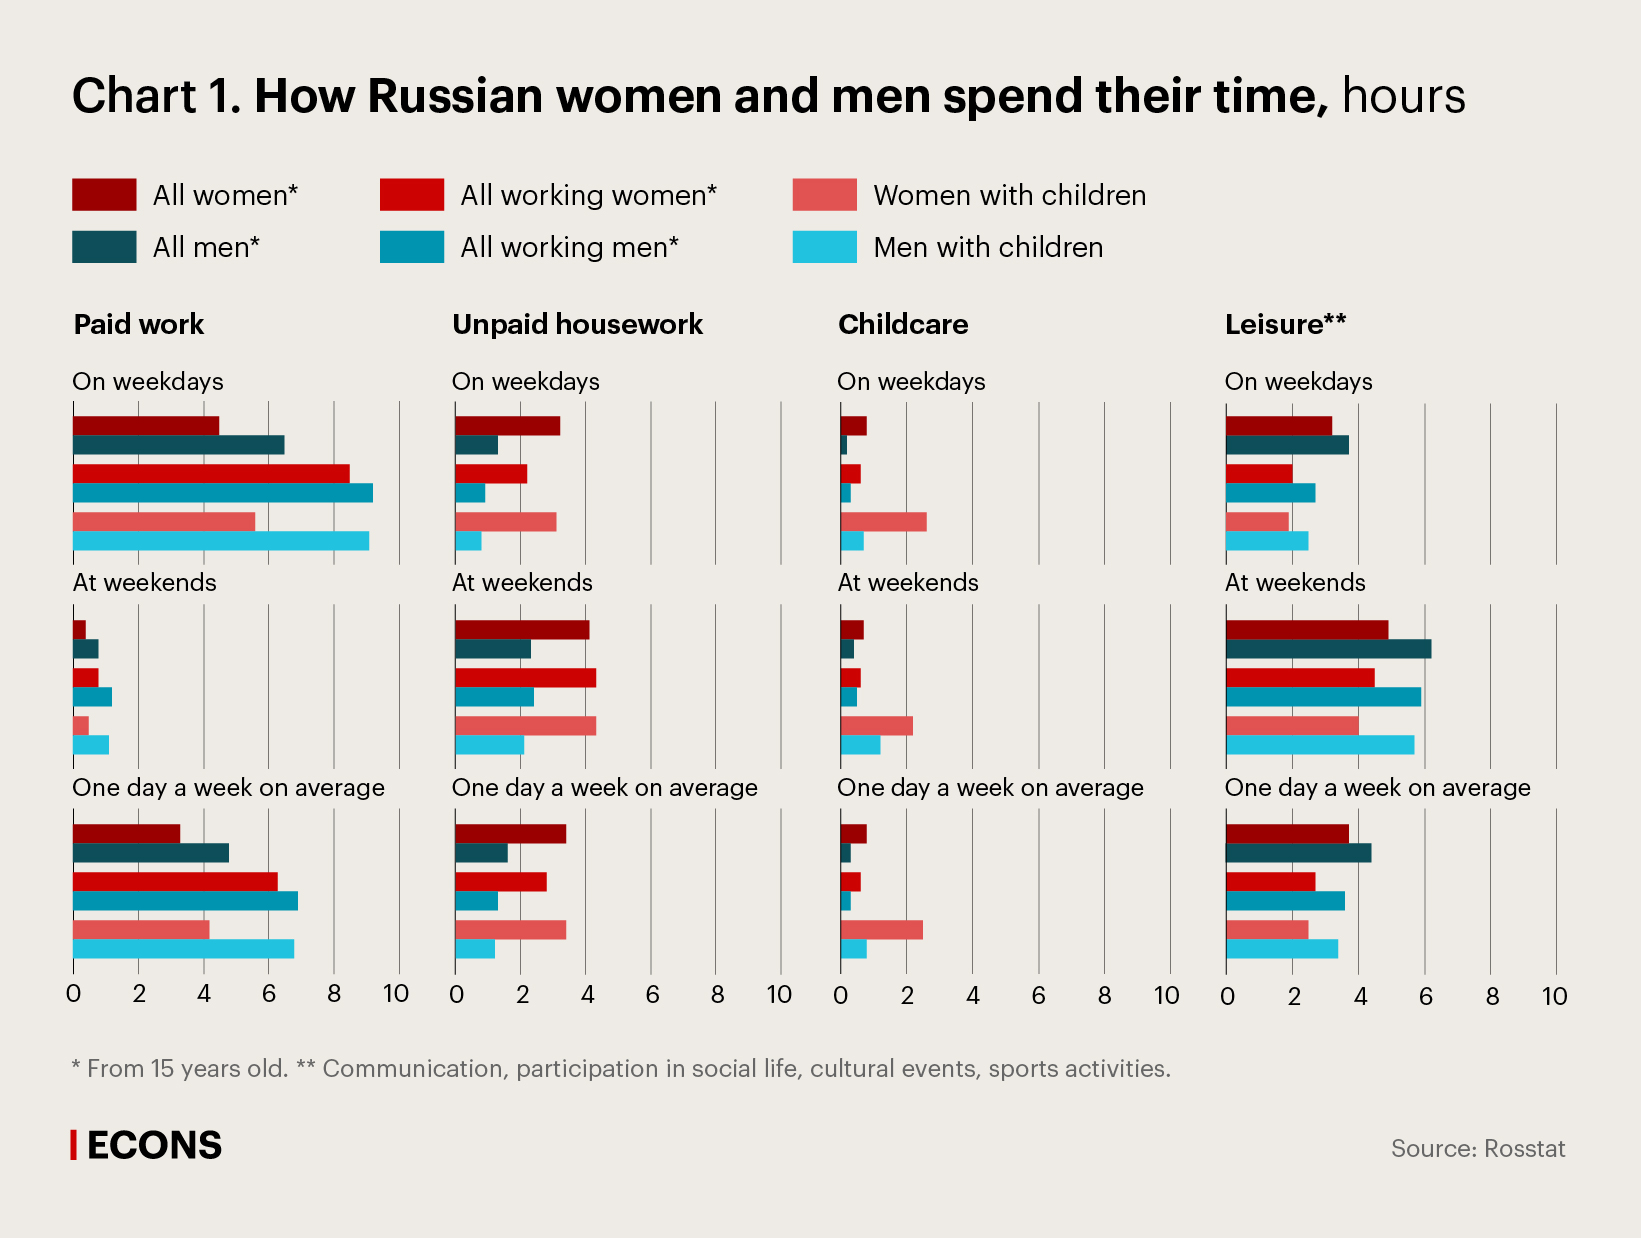 How Russian women and men spend their time, hours